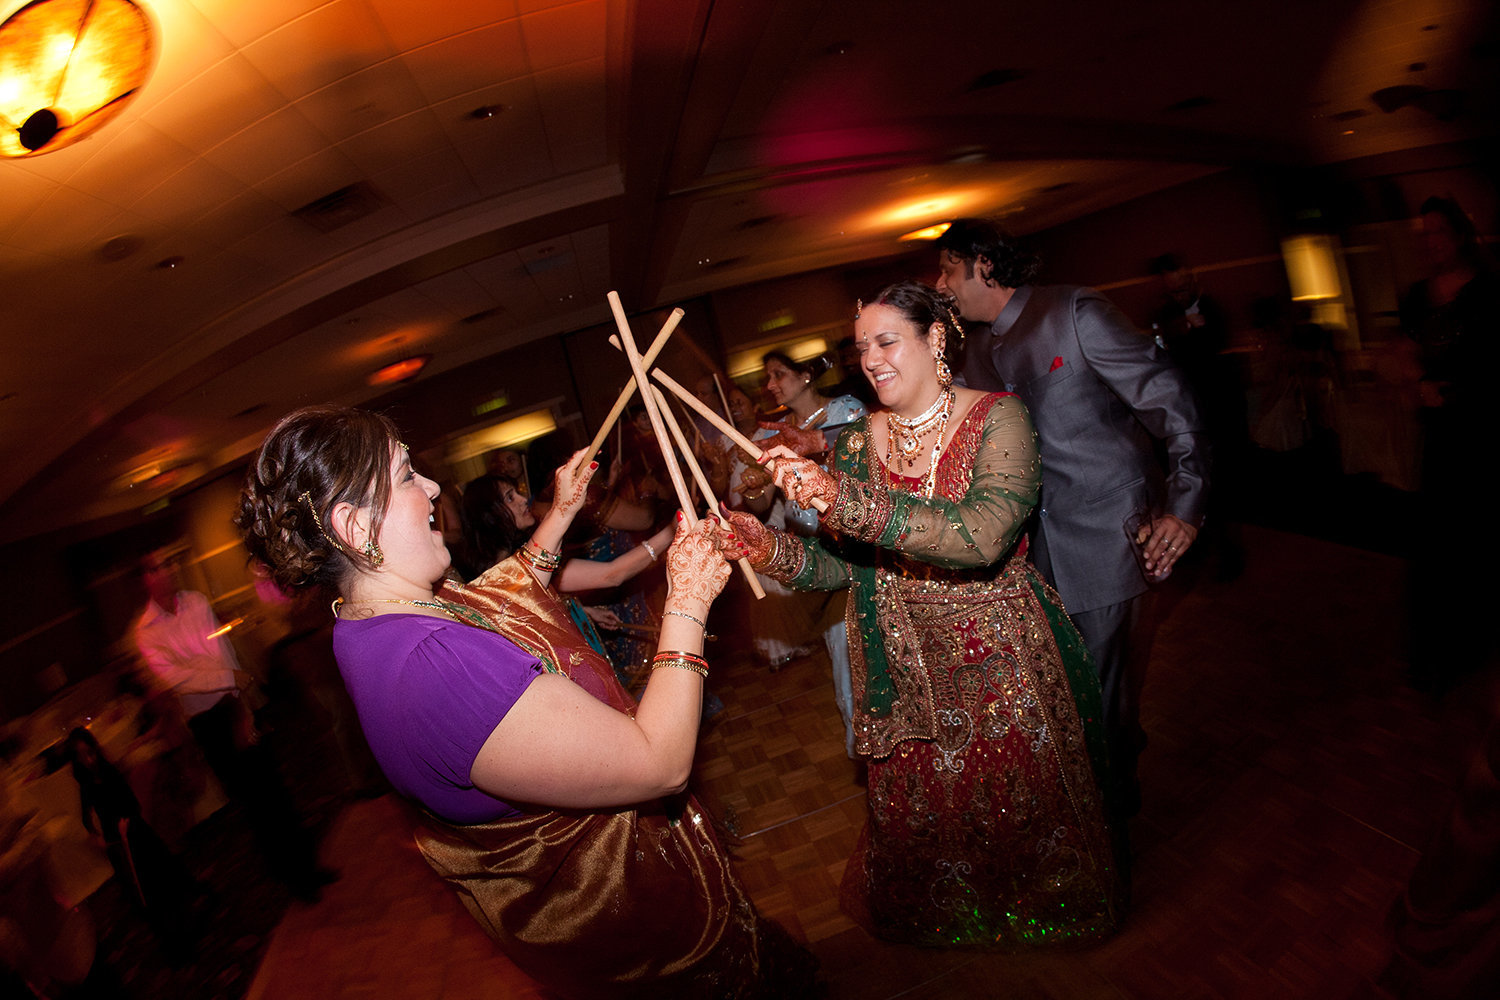 The Garba is a dance from Gujarat India performed at a Hindu wedding reception